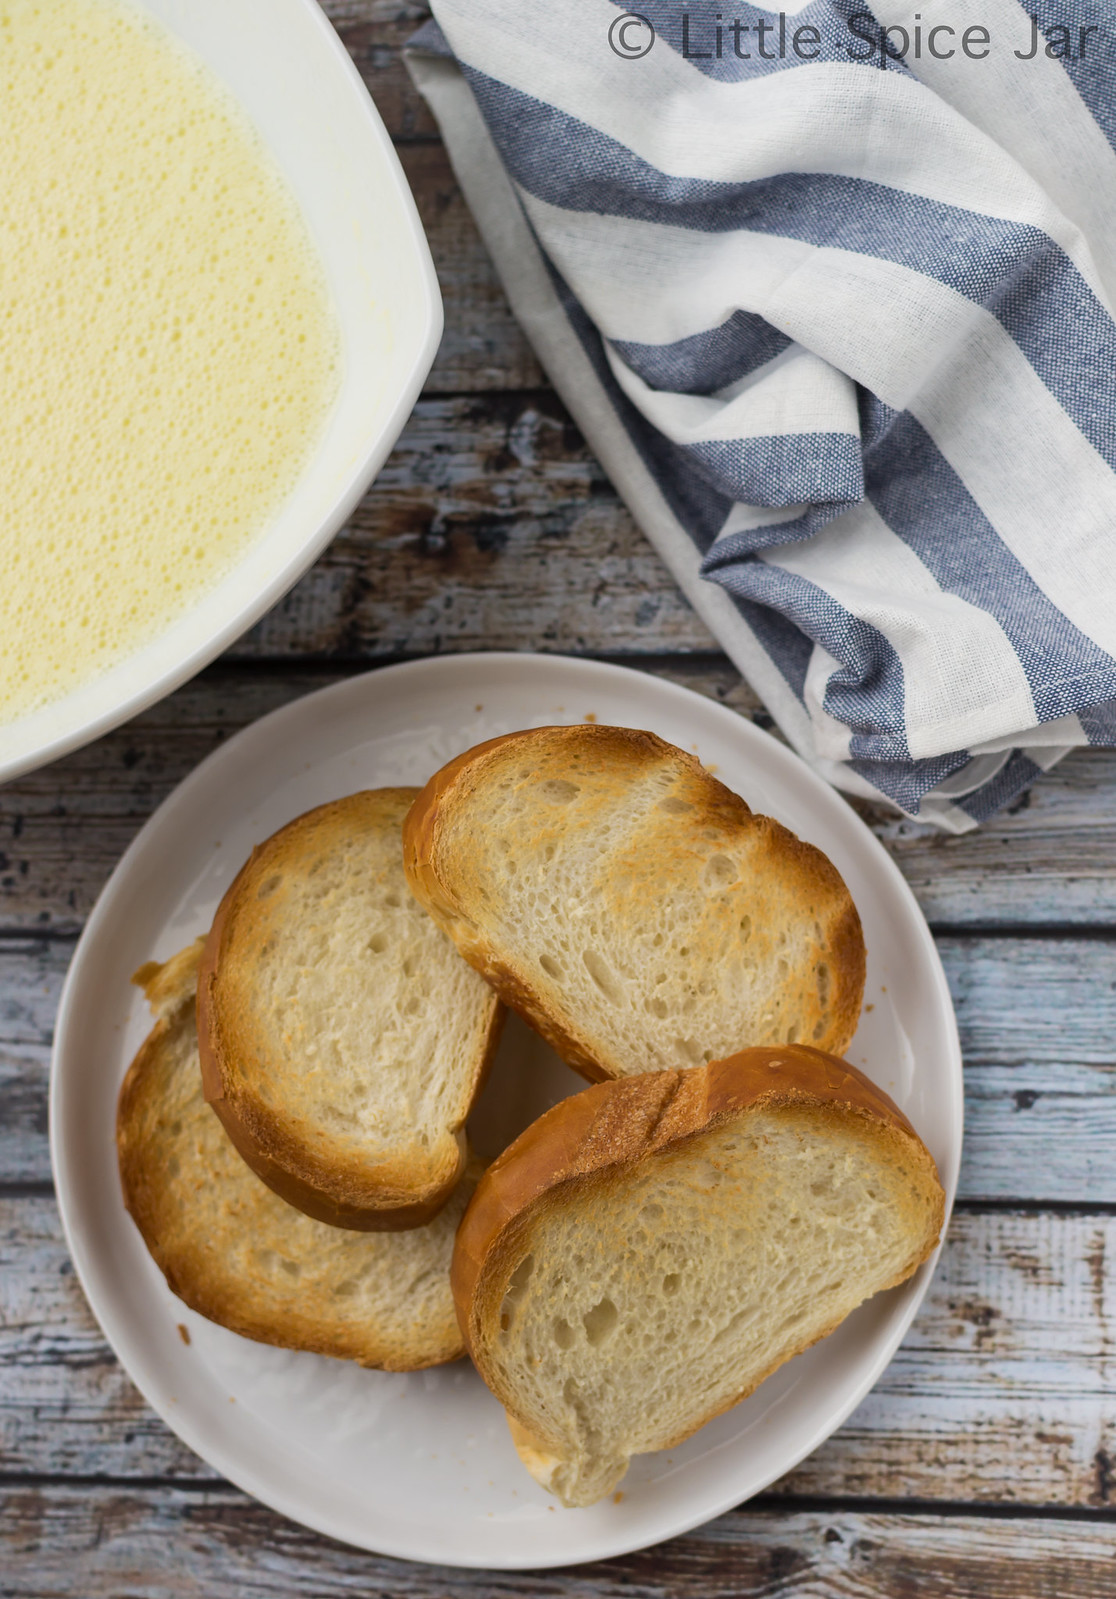 toast bread on white plate with custard in large bowl with striped towel on faux wood surface